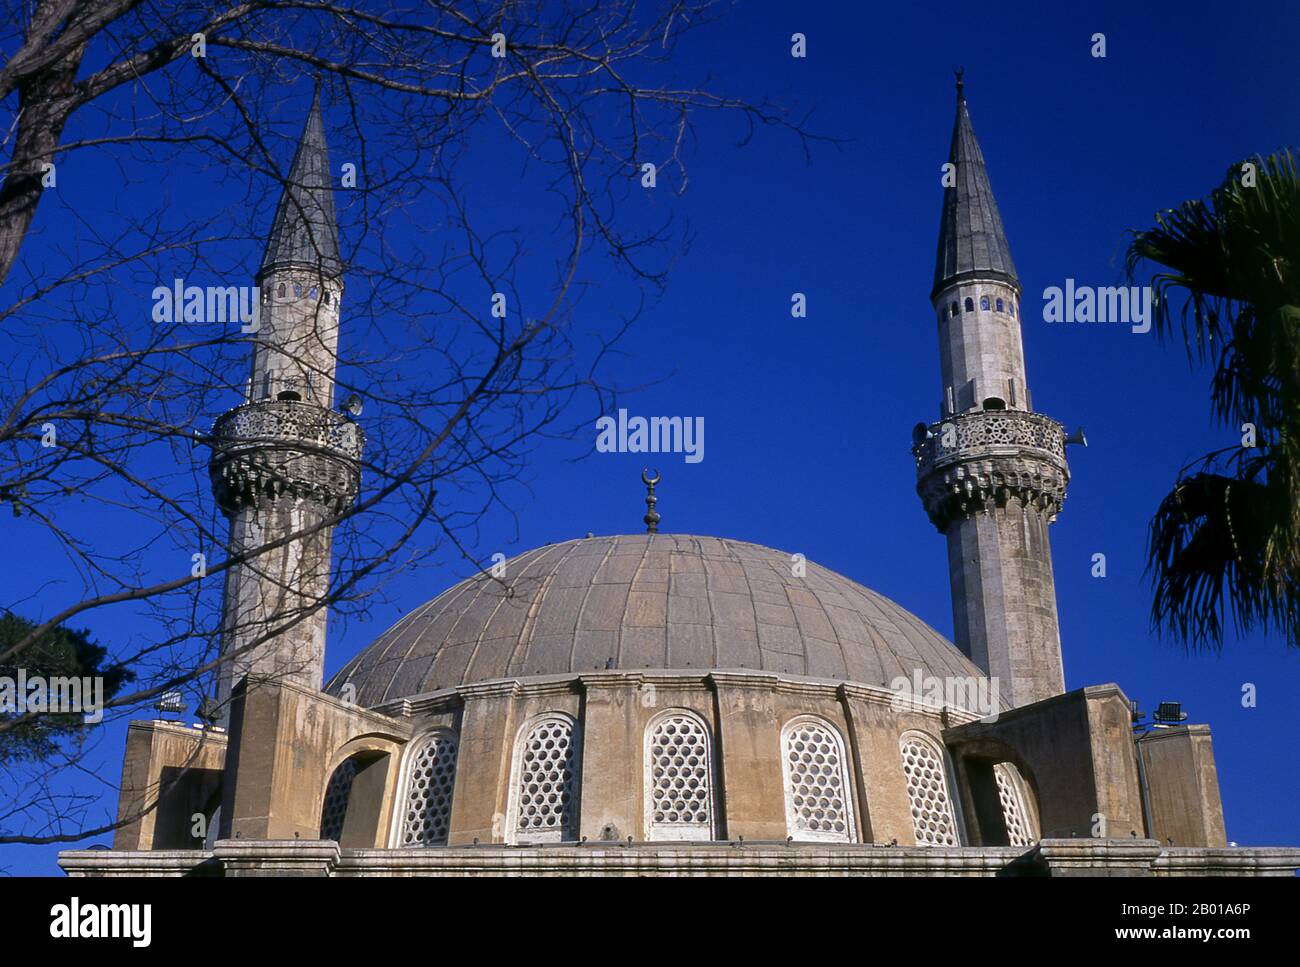 Syria: Tekkiye Mosque, Damascus.  The Tekkiye Mosque (also Takiyyeh as-Sulaymaniyyah, Takieh as-Sulaymaniyya)  was built on the orders of Suleiman the Magnificent and designed by the architect Mimar Sinan between 1554 and 1560. It has been described as 'The finest example in Damascus of Ottoman architecture'. Stock Photo